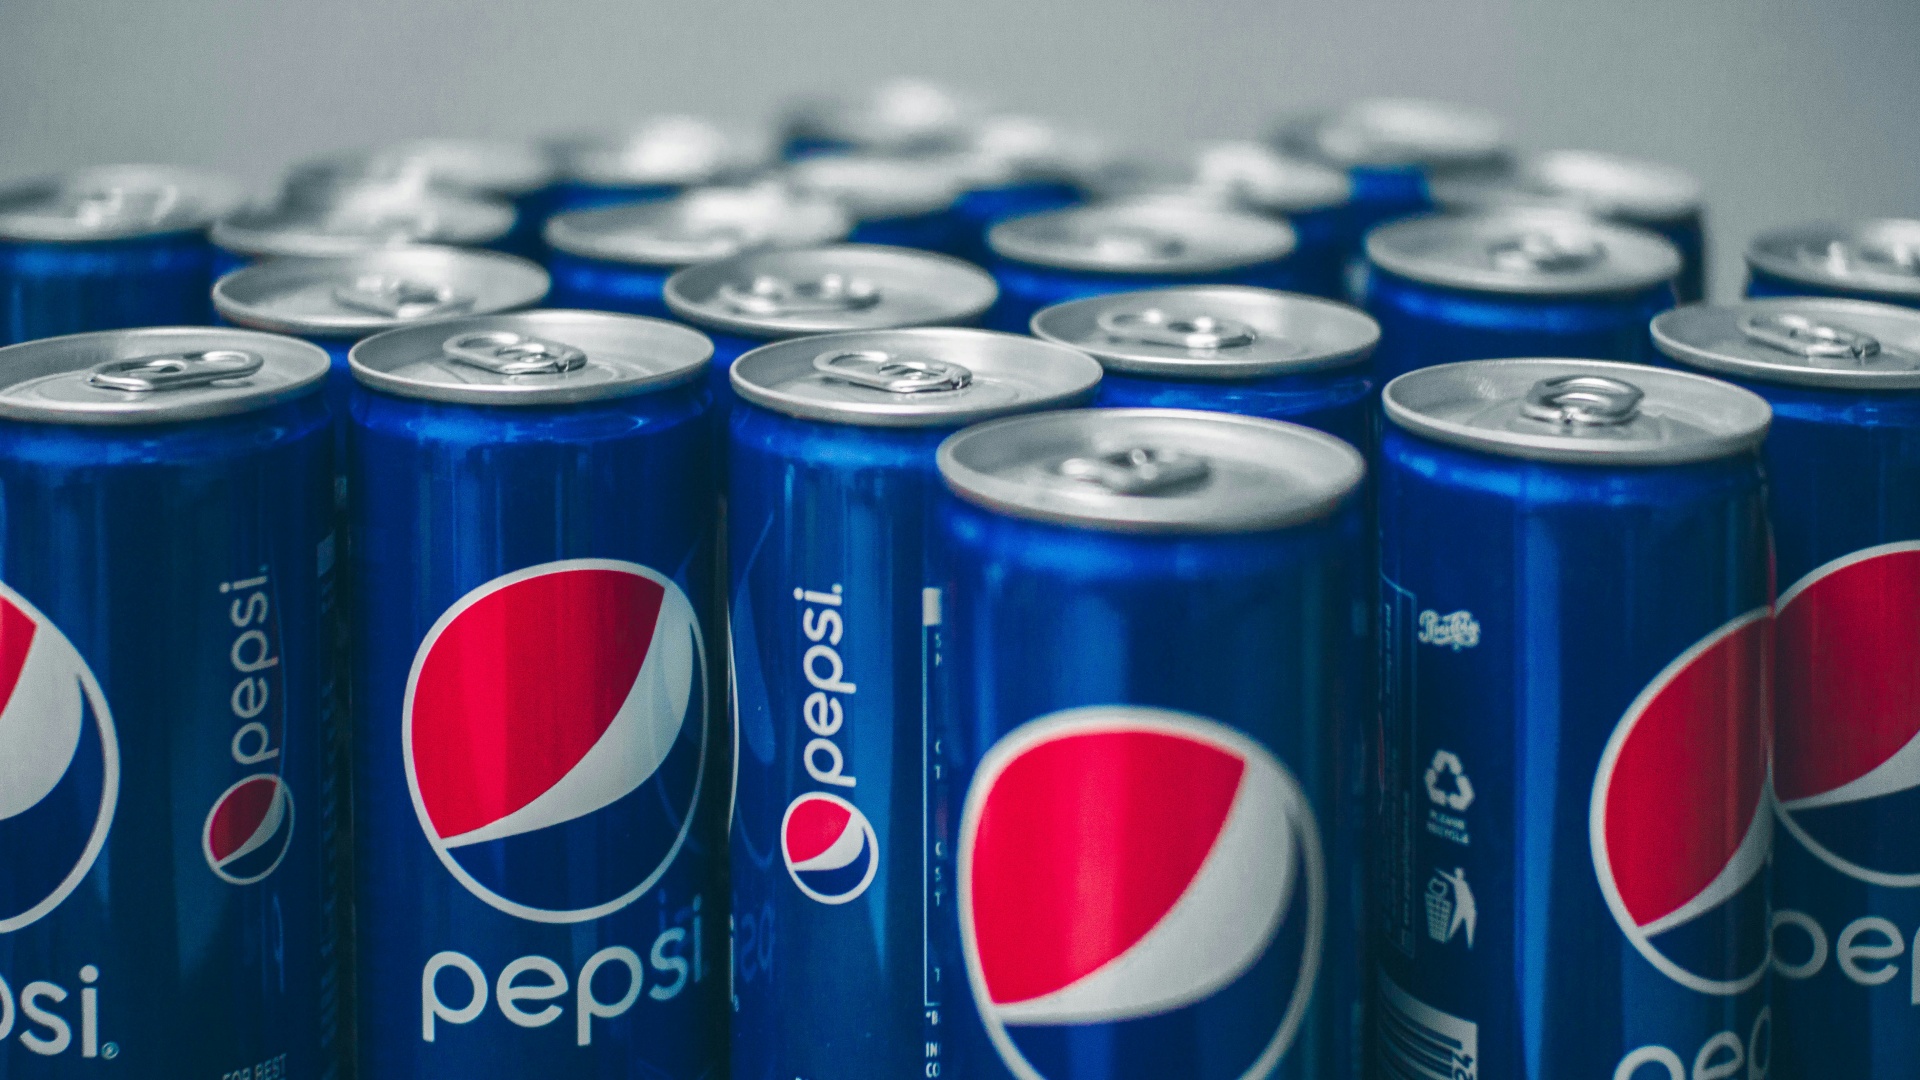 PepsiCo commits $400 million to build new factories in Ha Nam and Long An